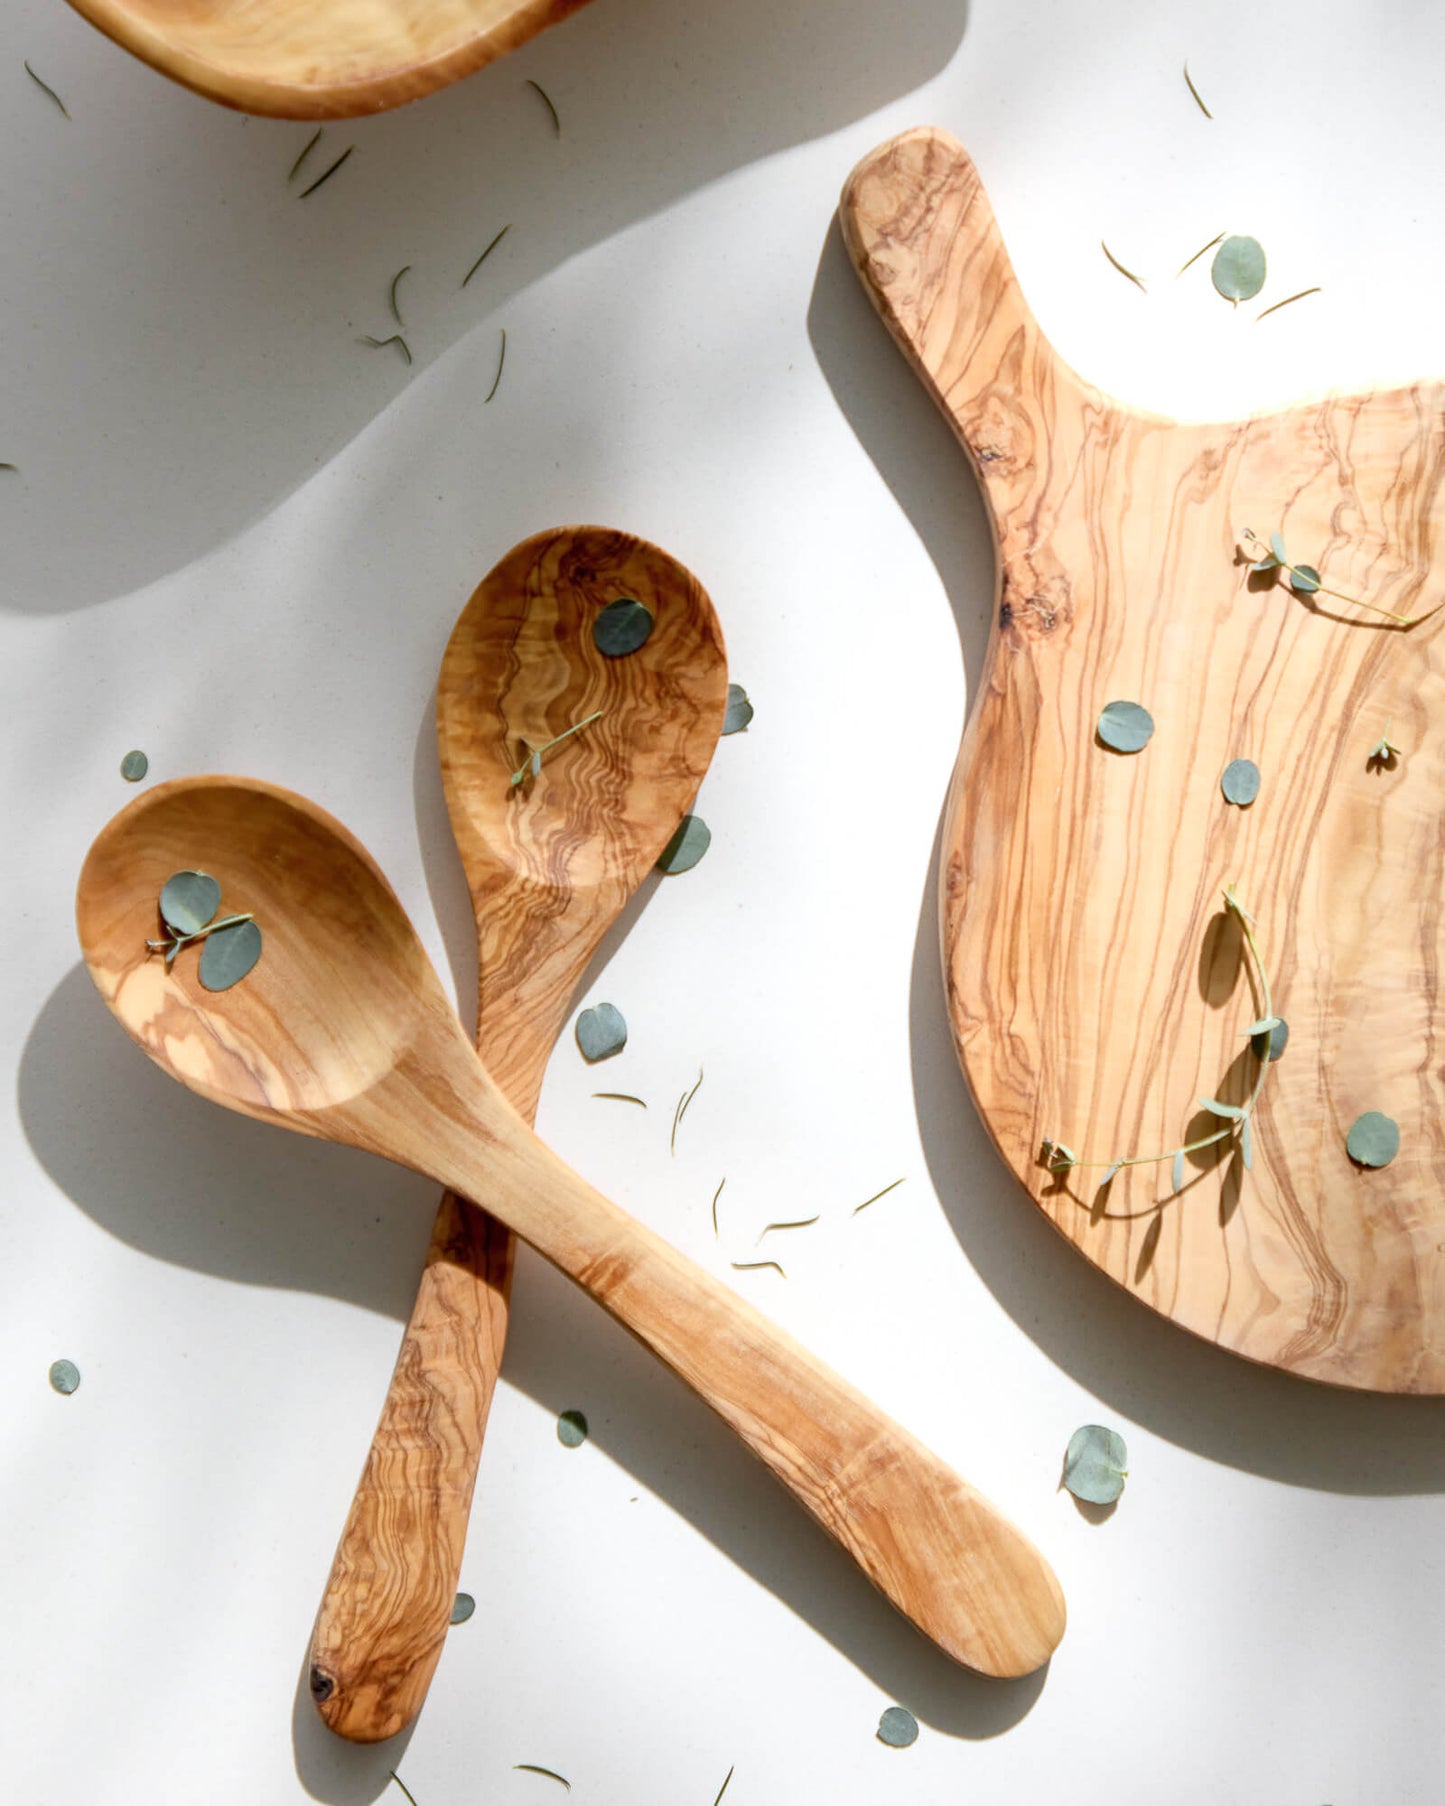 
                  
                    Olive wood spoons and bread board with shadows cast and loose florals.
                  
                